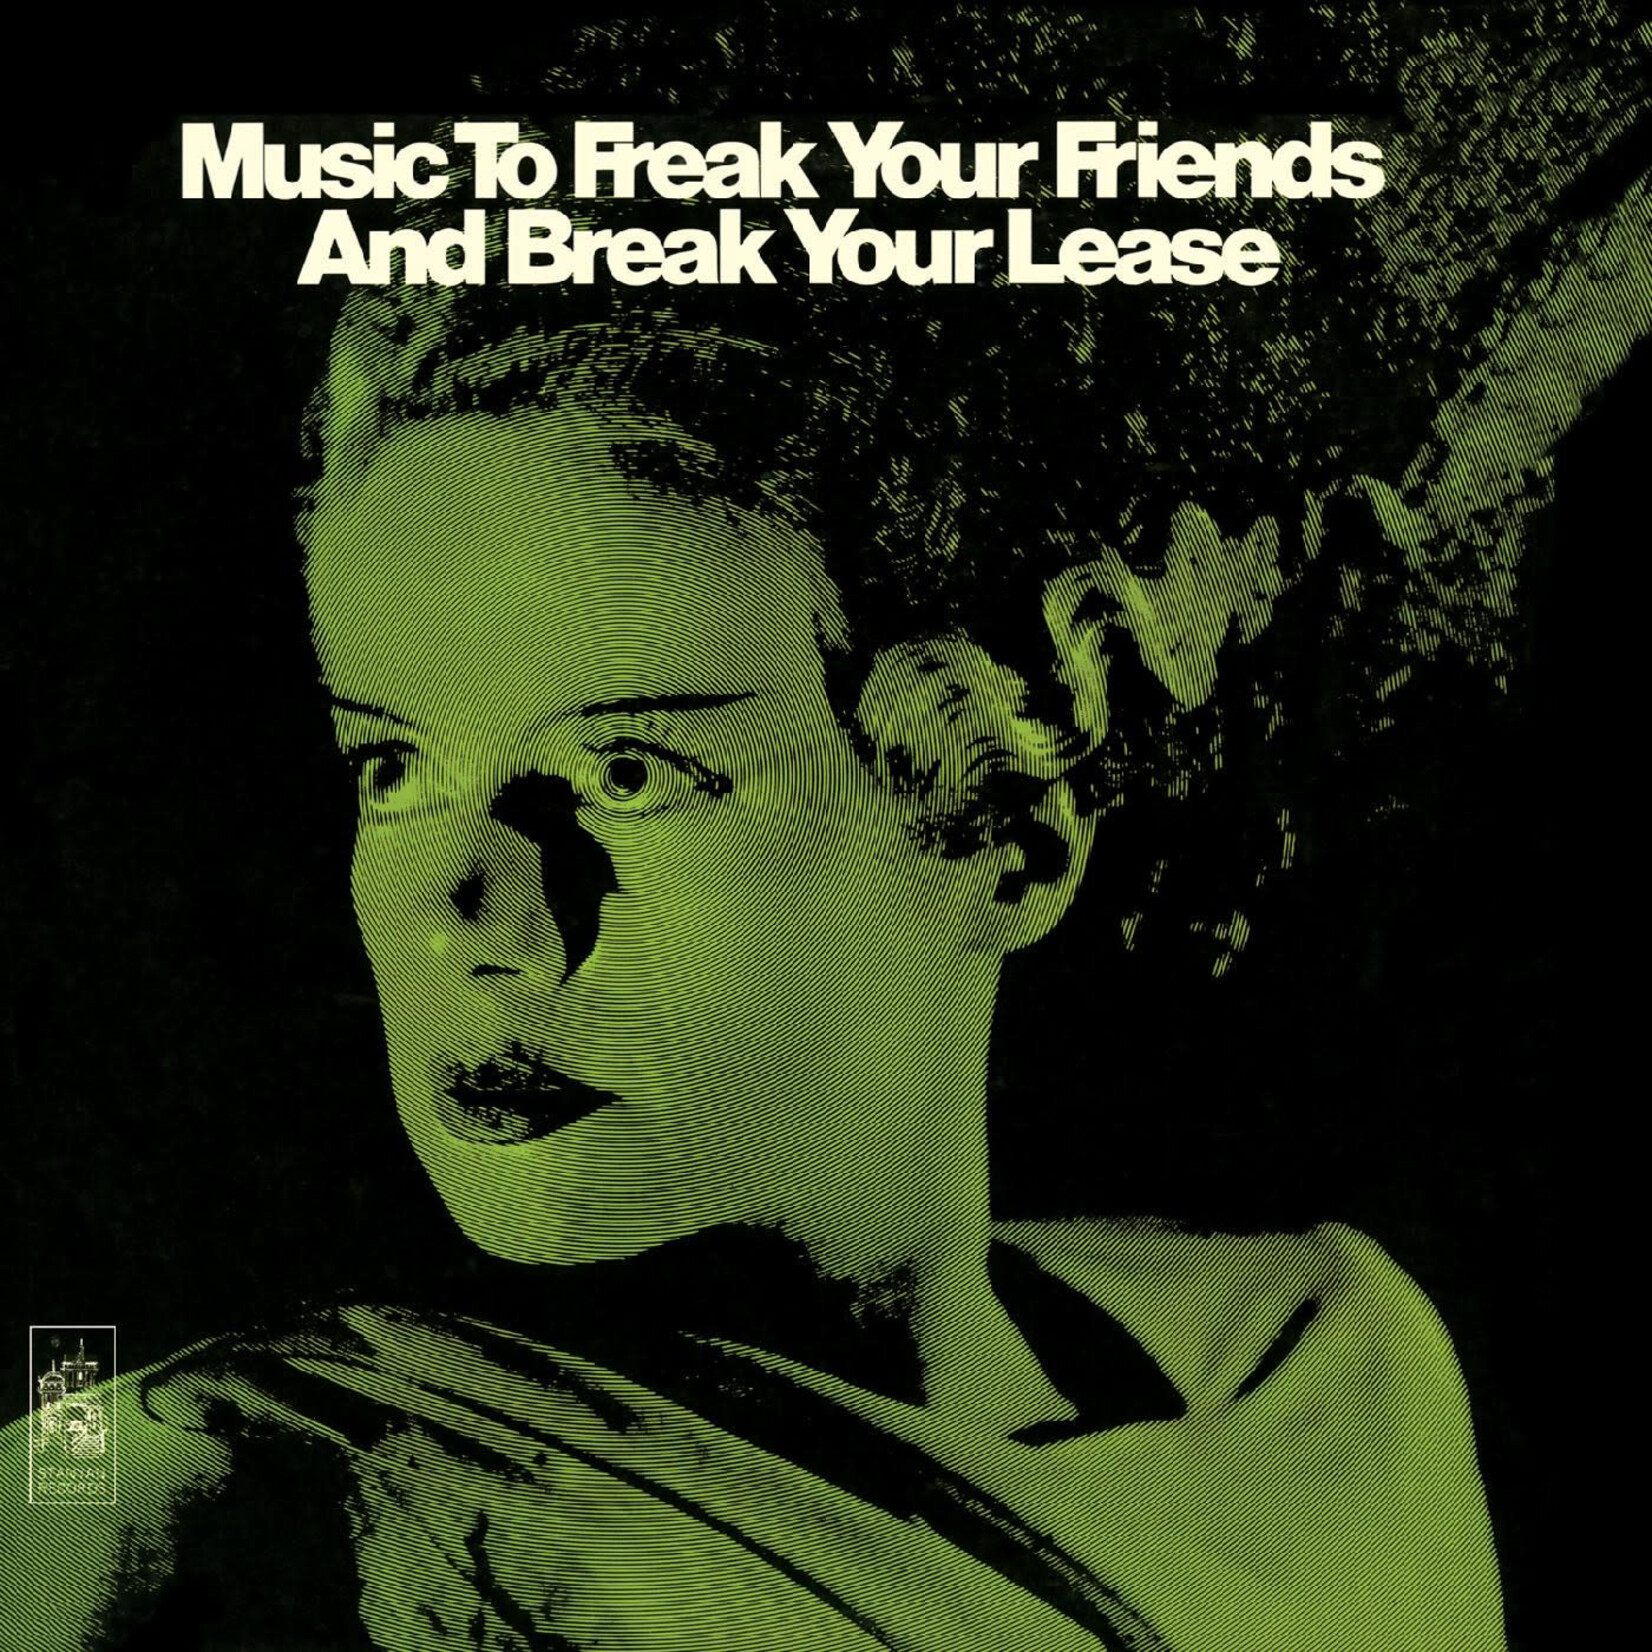 Real Gone Rod McKuen / Heins Hoffman-Richter - Music to Freak Your Friends and Break Your Lease (LP) [Seaglass Swirl]